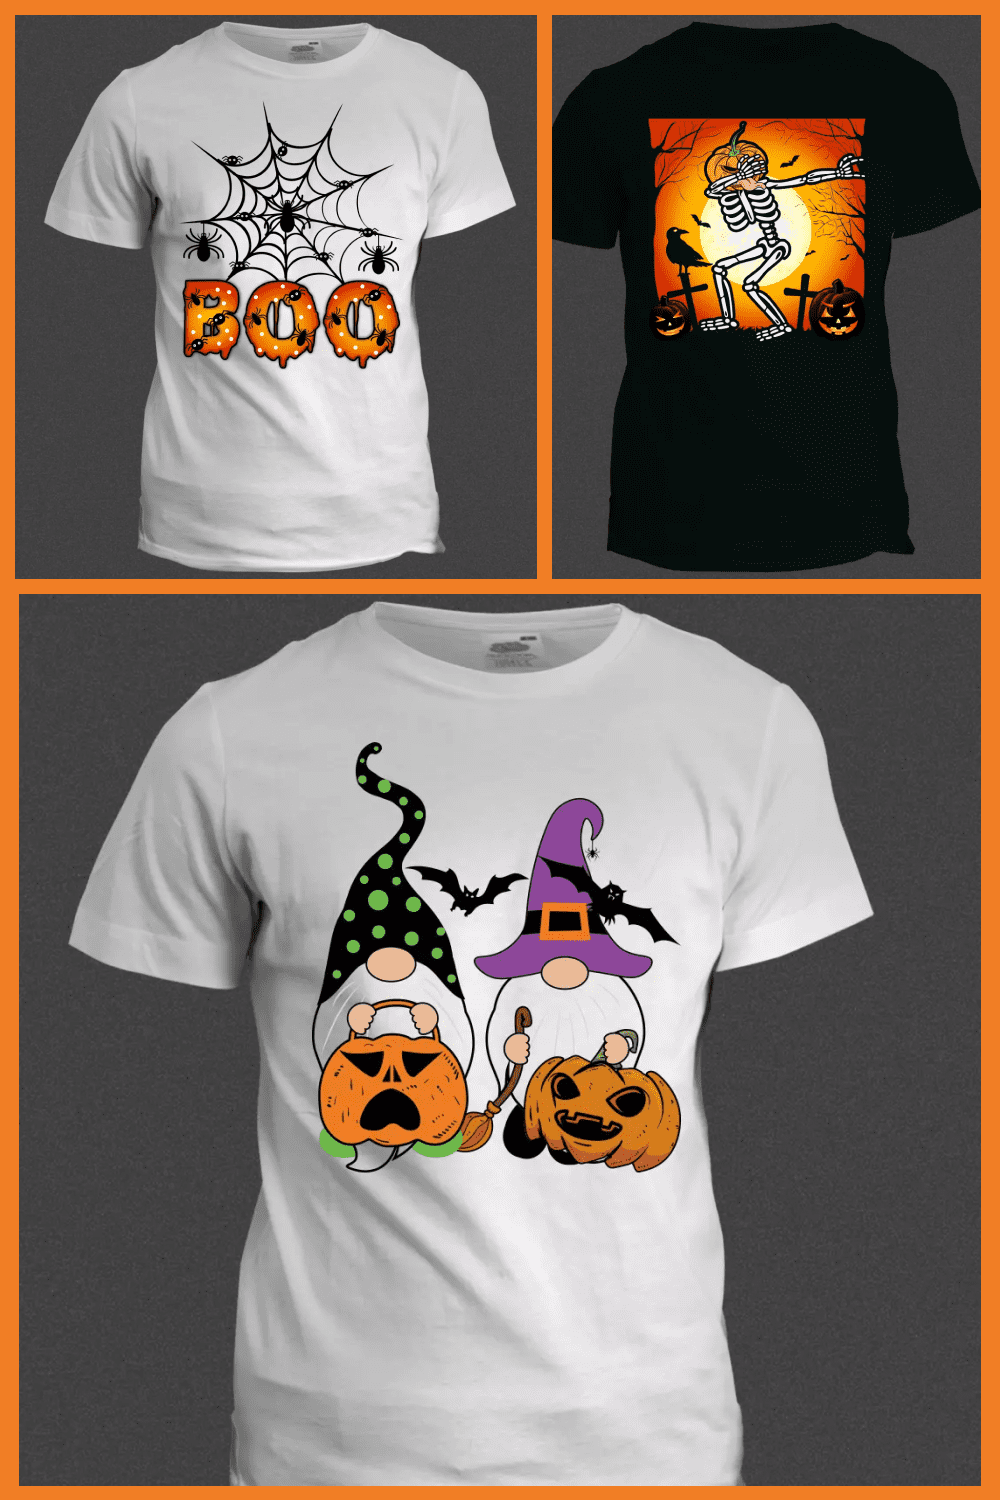 T-shirts with bright prints for Halloween with gnomes, pumpkins, skeleton, spiders.